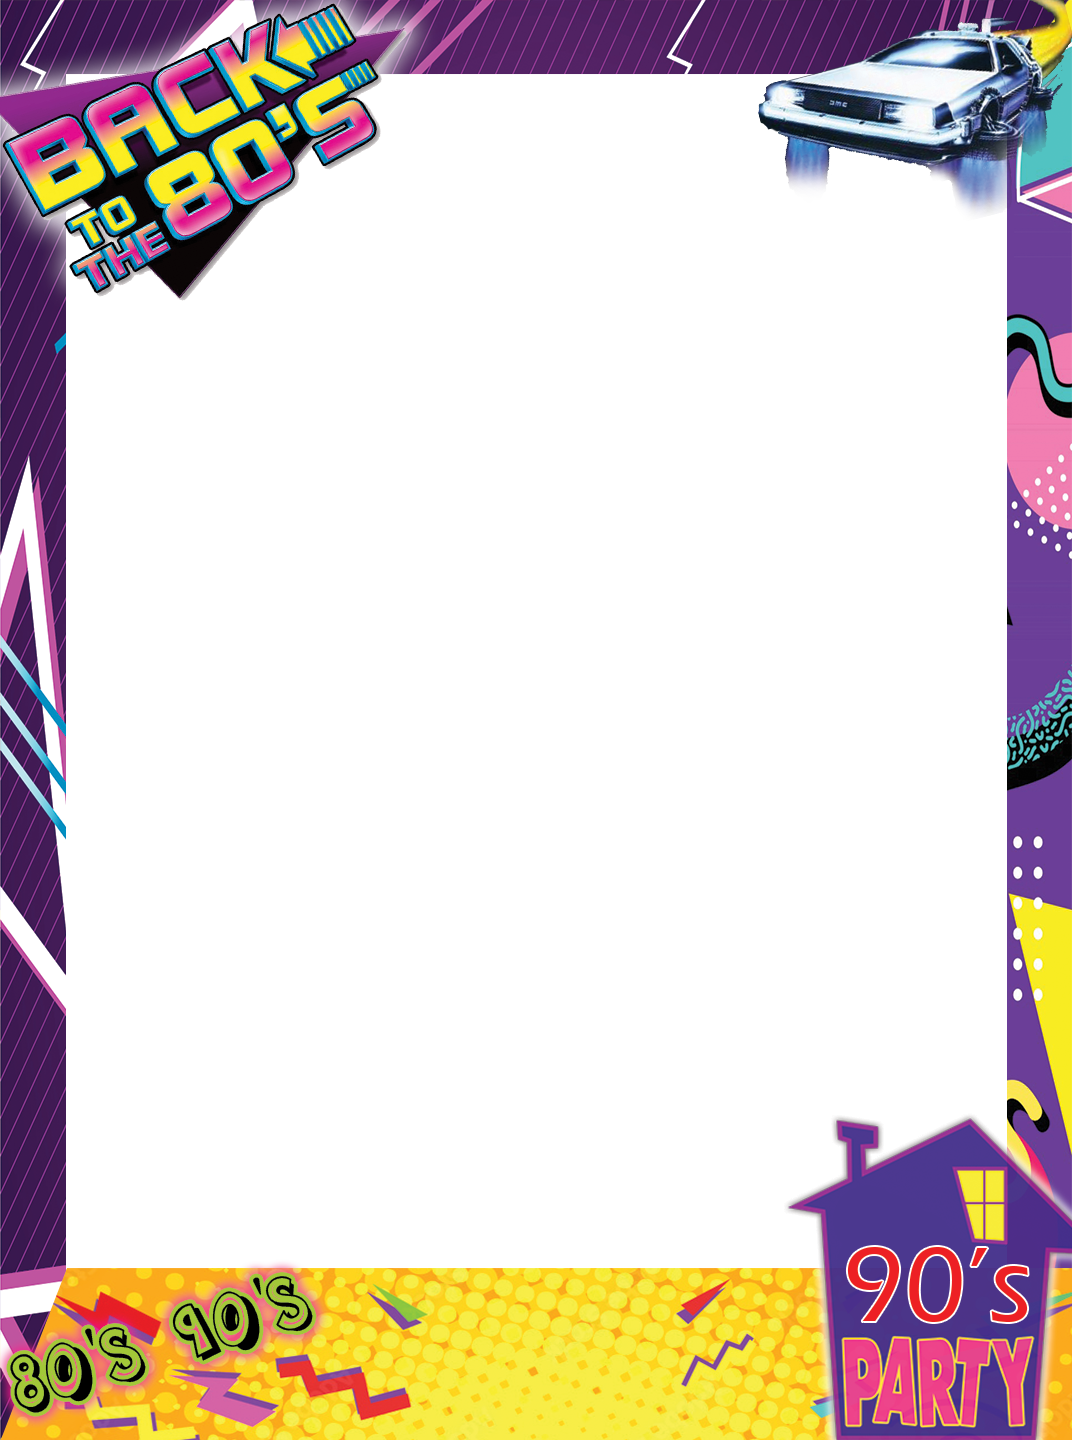 80s 90s overlay png